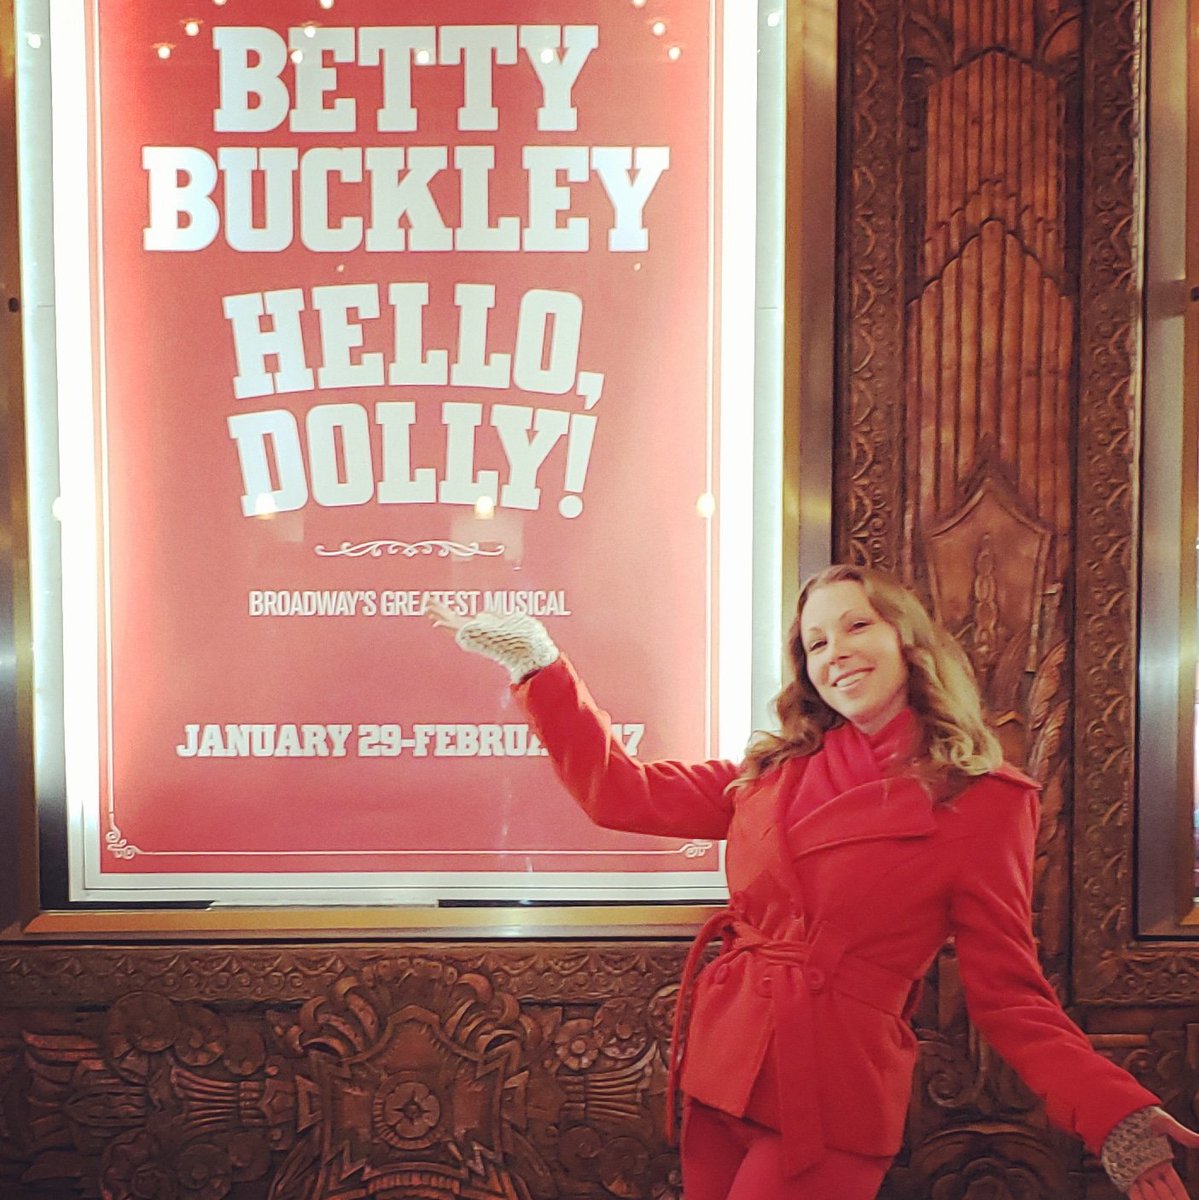 #inspired by the incredible #broadwaylegend @BettyBuckley still rocking it 8 shows a week in @HelloDollyBway @Pantages Betty you're amazing! High five from your girl JDay! #greattheatre #jdayworld #nightoutinla